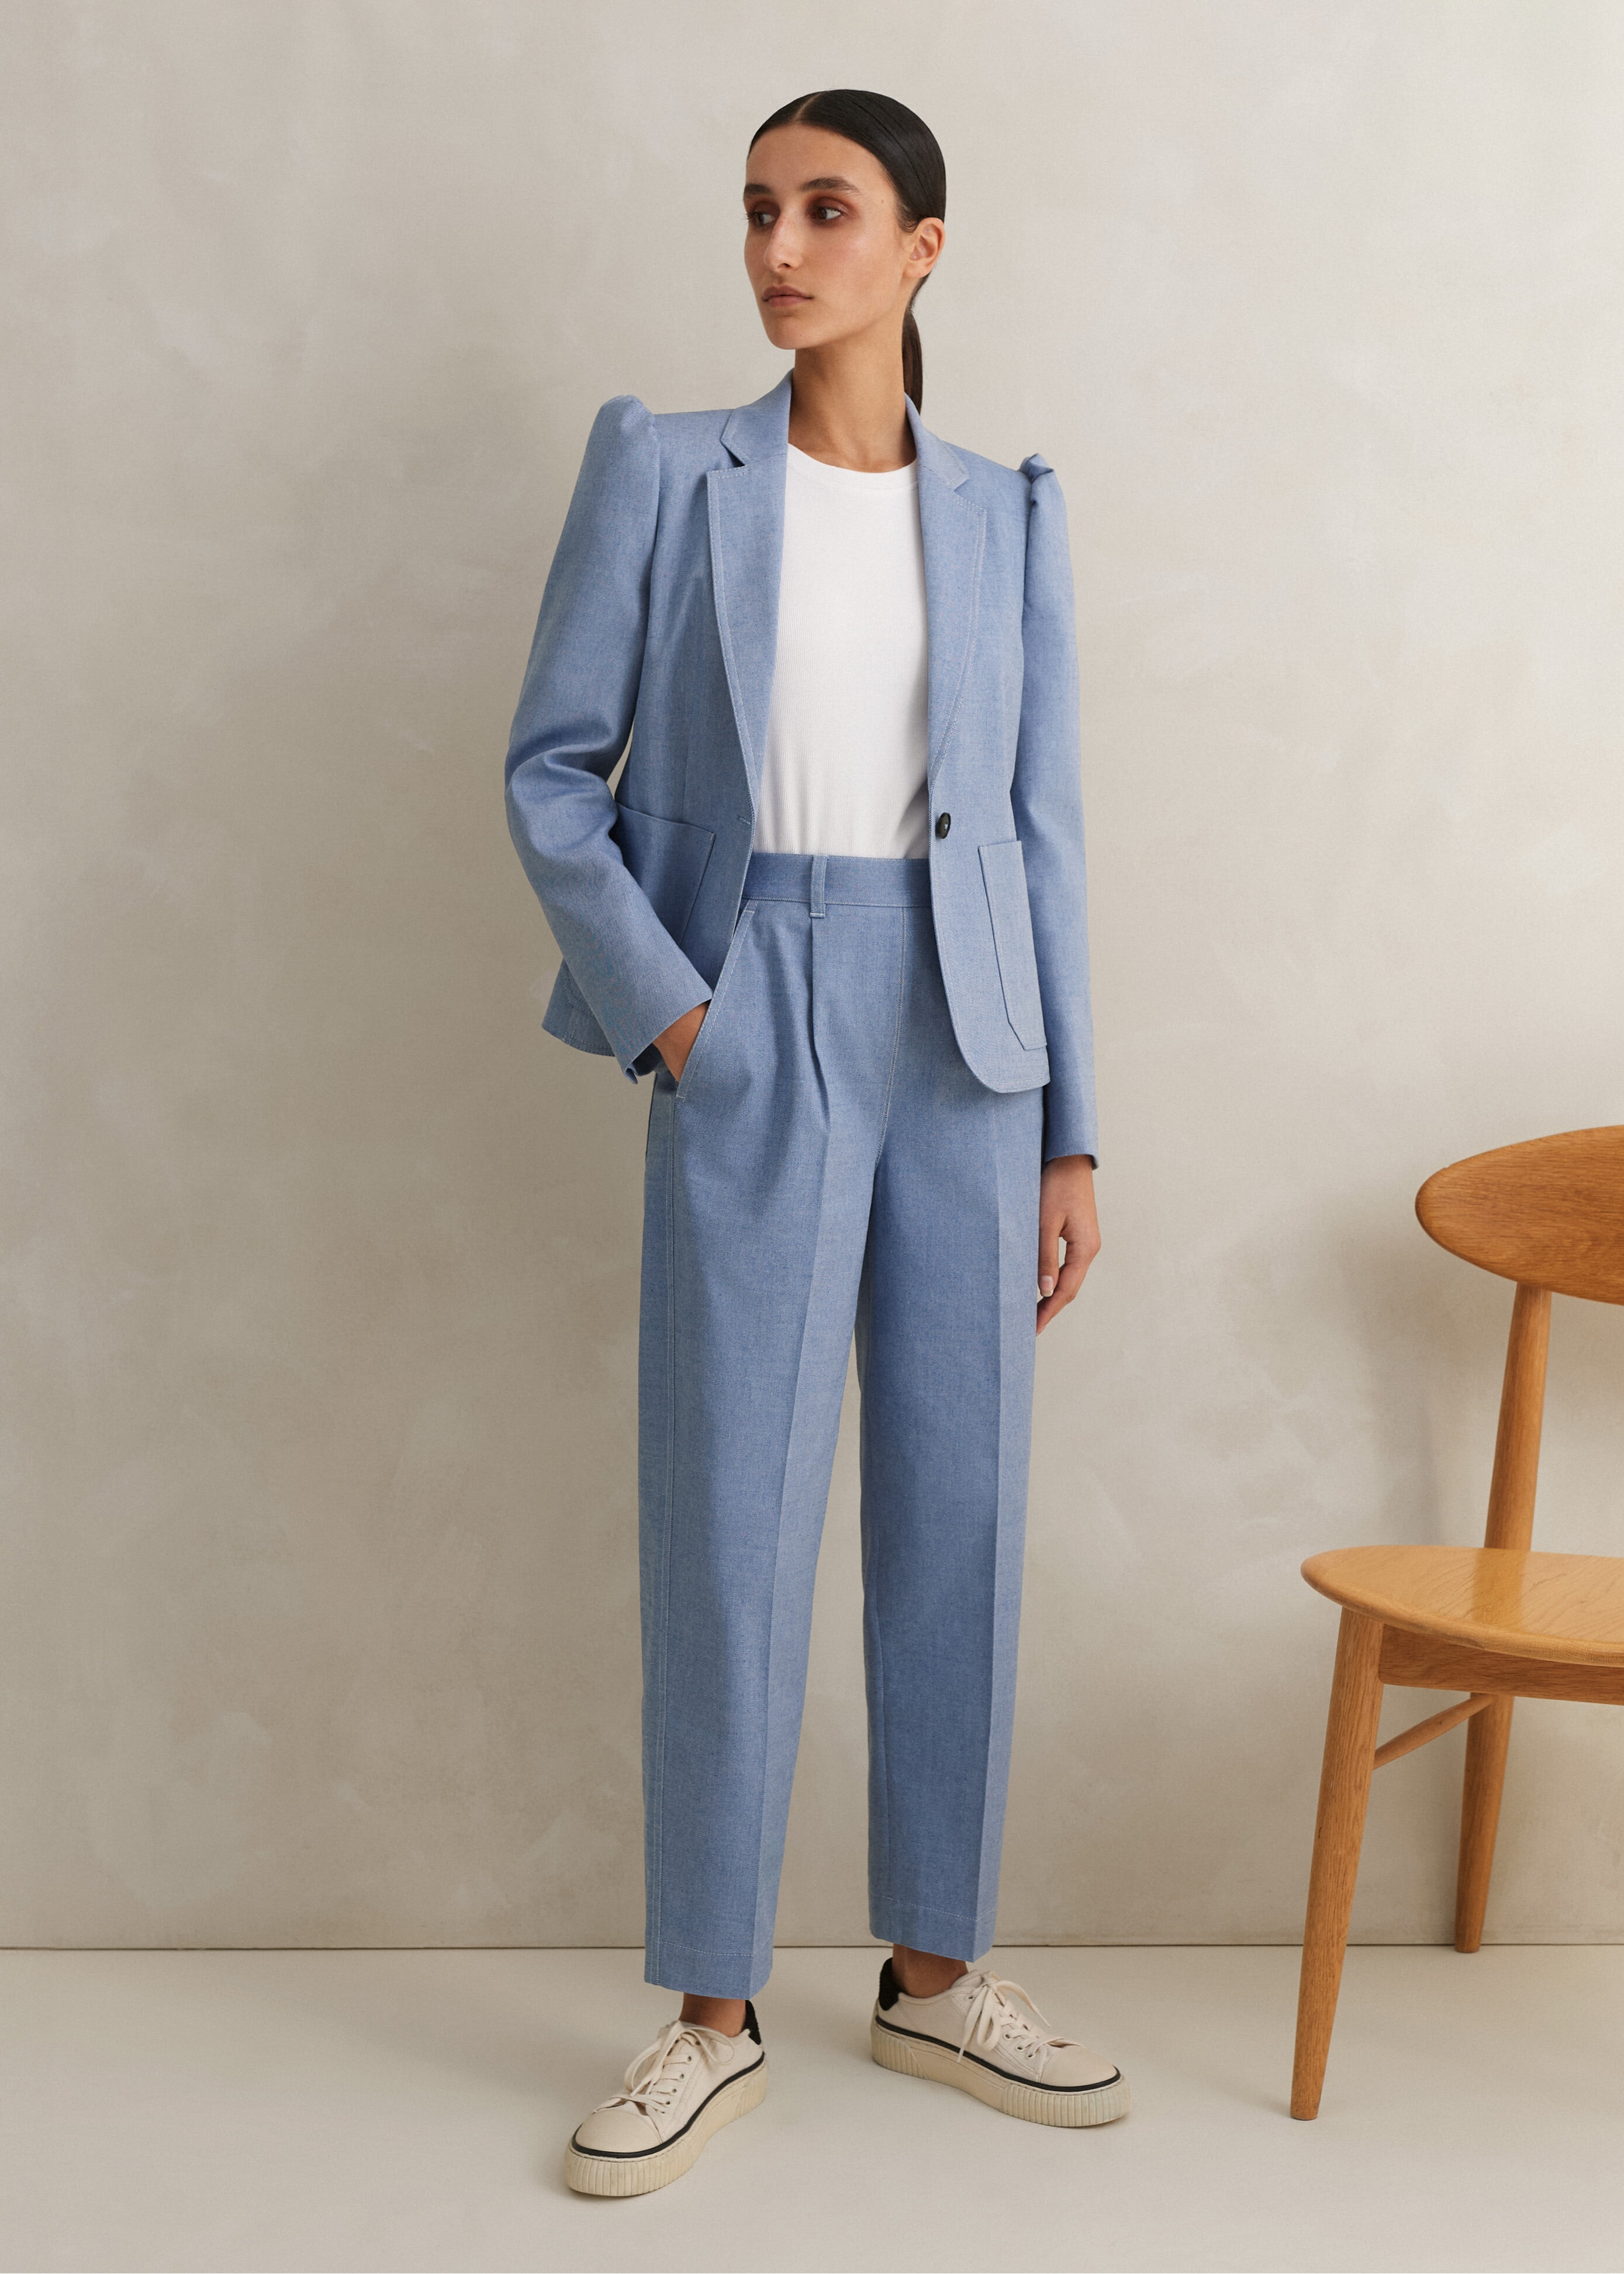 Chambray Tailoring Tapered Pant Suit Blue